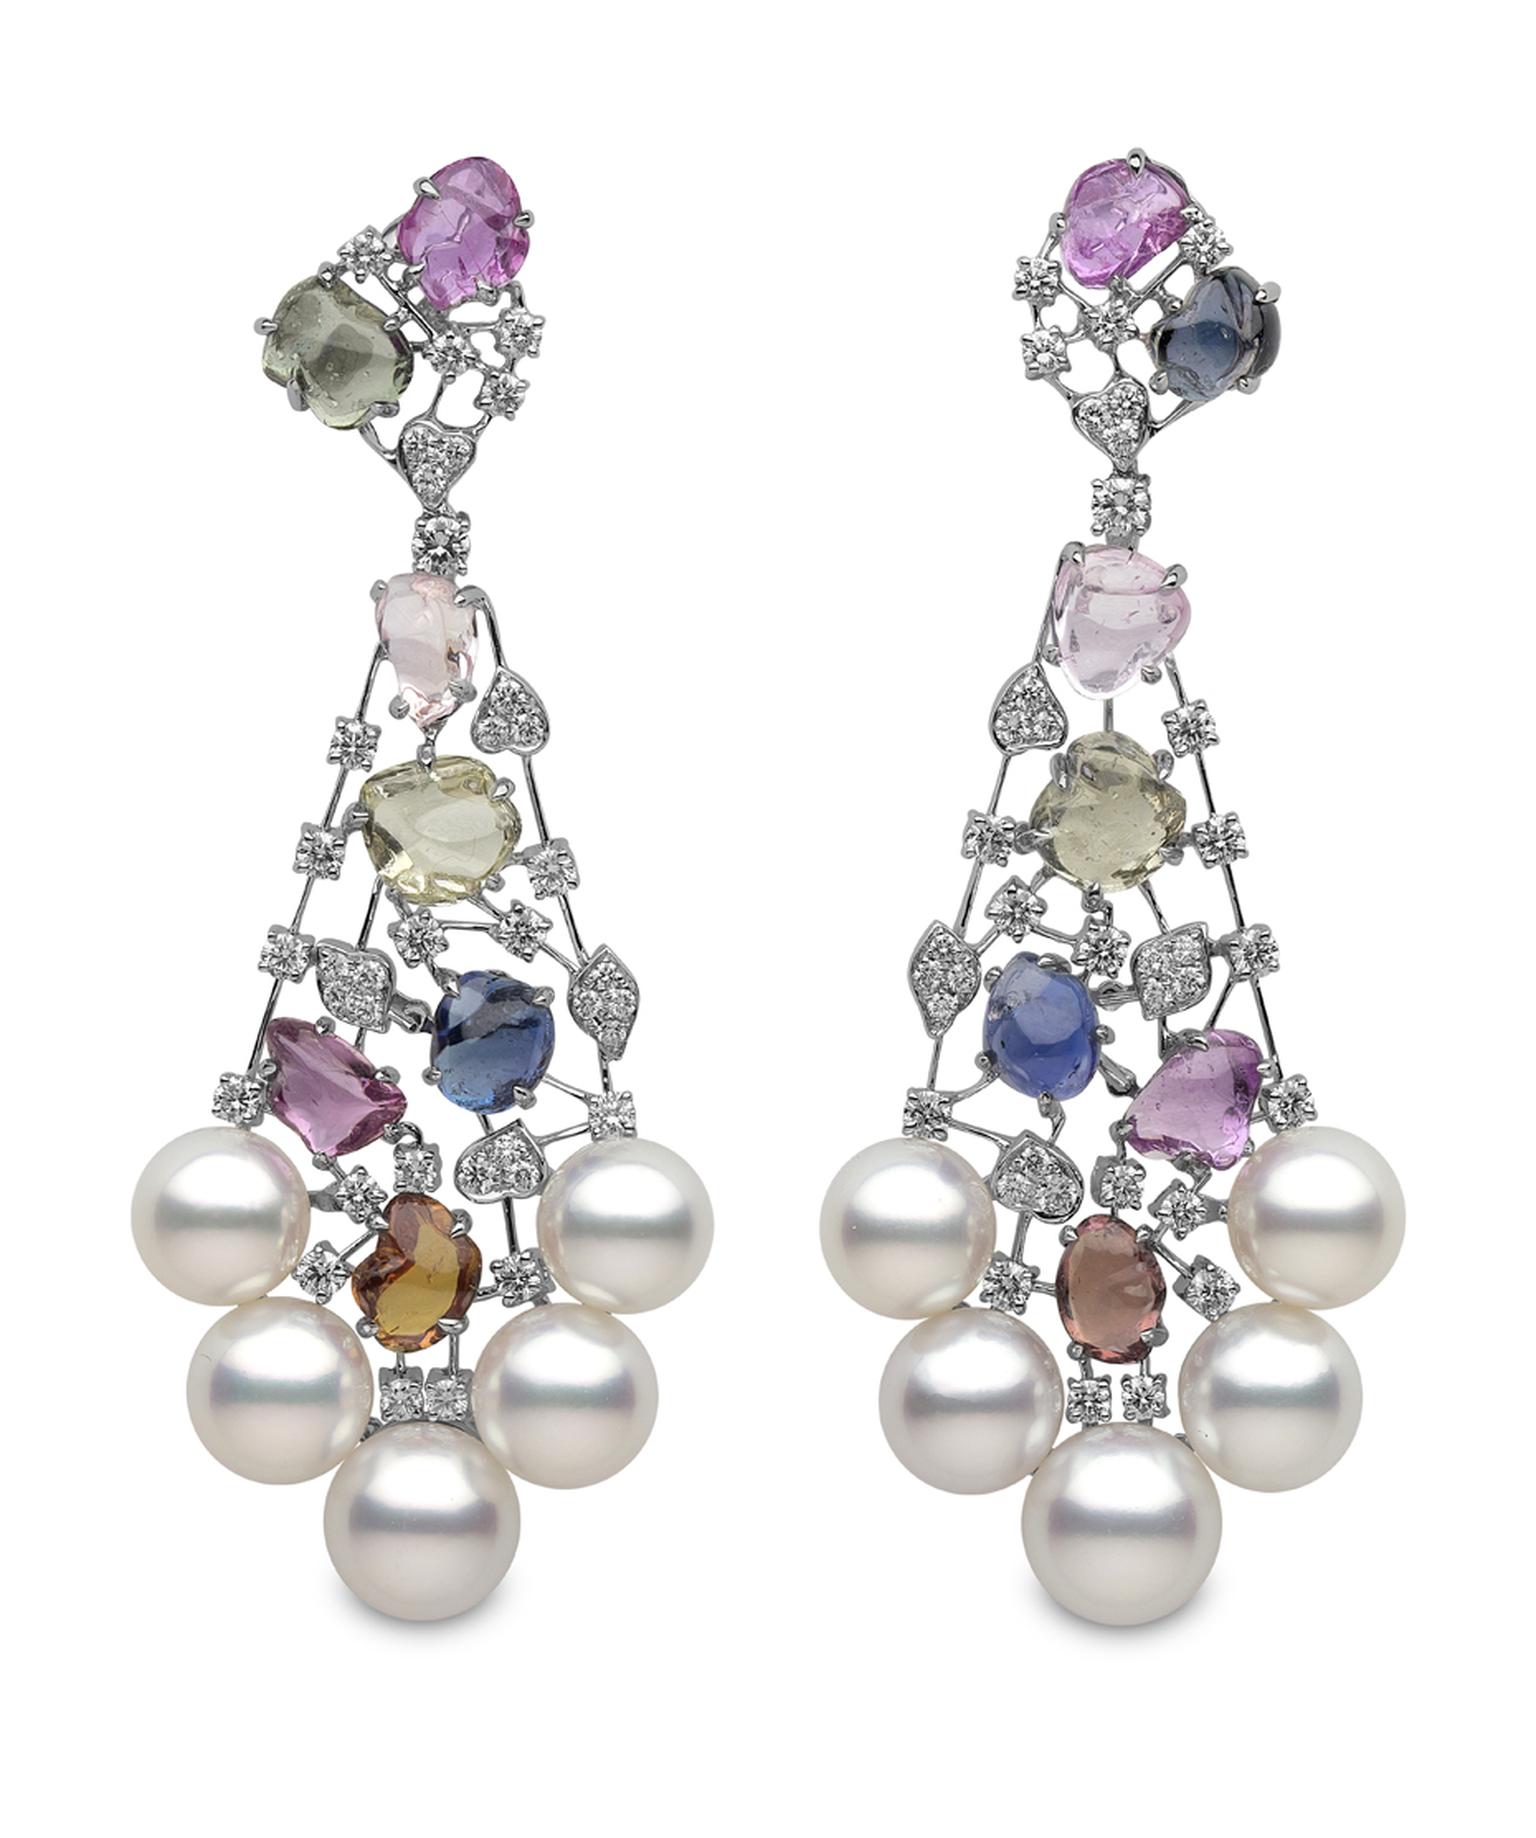 Yoko London white gold Aurora earrings from the Masterpiece collection, featuring Australian South Sea pearls, multi-coloured sapphires and diamonds